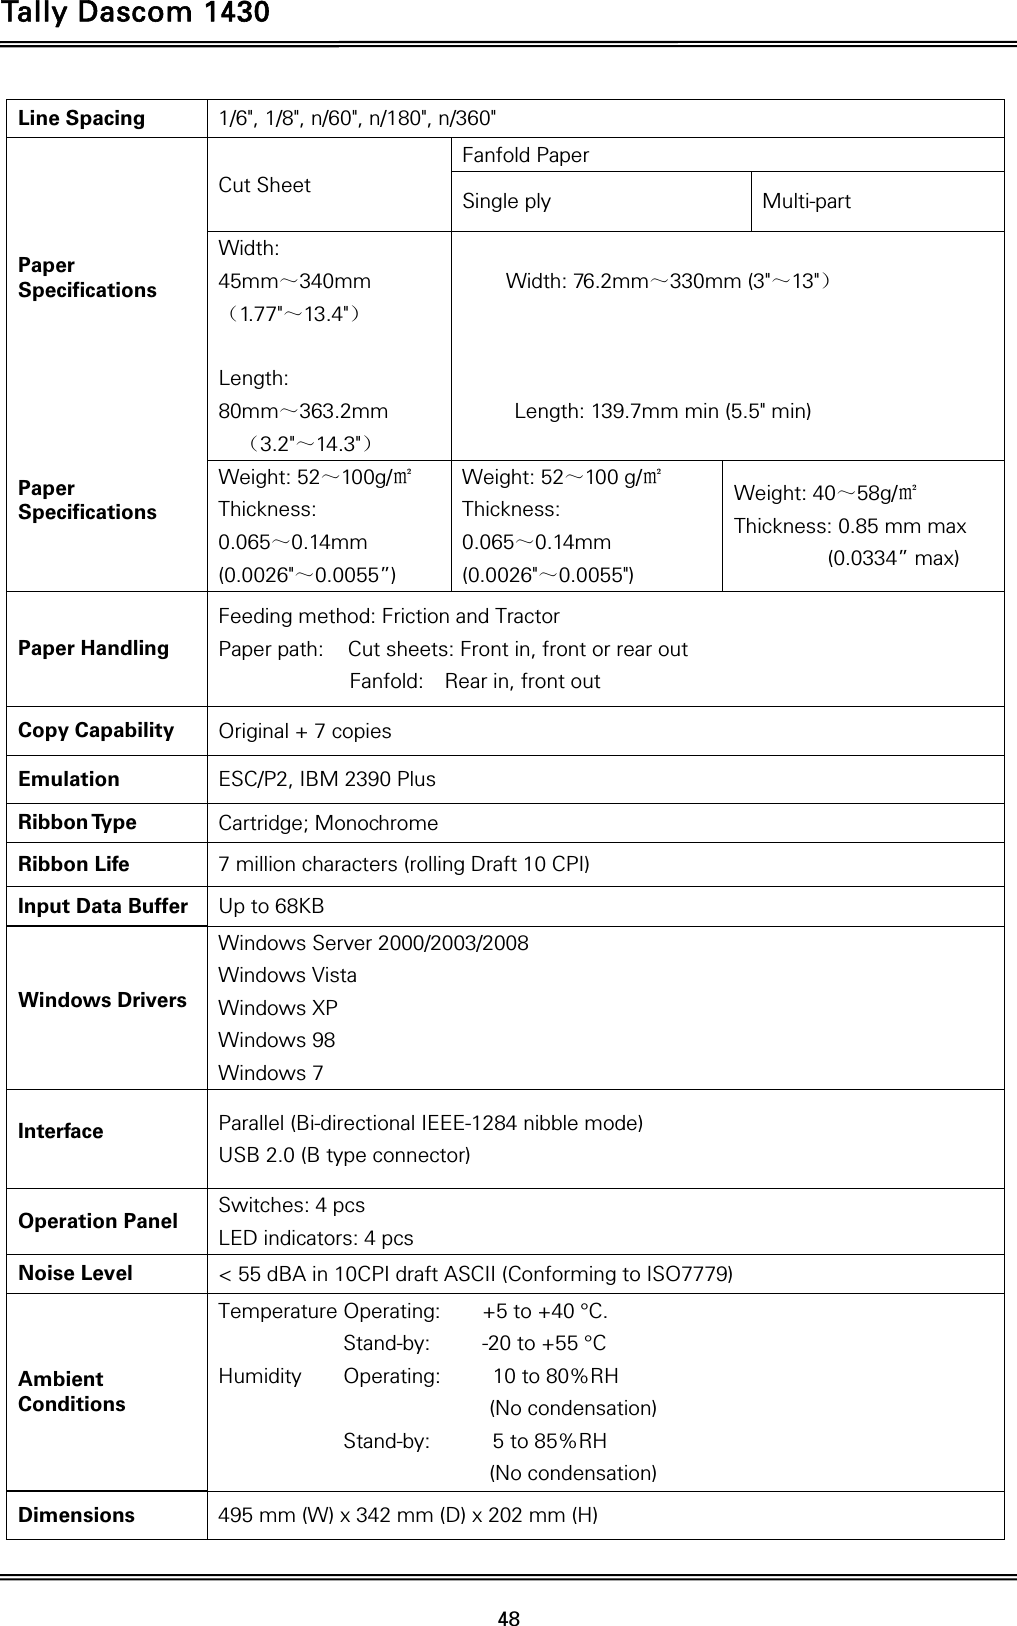 Tally Dascom 1430   48  Line Spacing  1/6&quot;, 1/8&quot;, n/60&quot;, n/180&quot;, n/360&quot;    Paper Specifications        Paper Specifications  Cut Sheet Fanfold Paper Single ply  Multi-part Width: 45mm～340mm （1.77&quot;～13.4&quot;）  Length: 80mm～363.2mm （3.2&quot;～14.3&quot;）   Width: 76.2mm～330mm (3&quot;～13&quot;）    Length: 139.7mm min (5.5&quot; min) Weight: 52～100g/㎡ Thickness: 0.065～0.14mm (0.0026&quot;～0.0055”) Weight: 52～100 g/㎡ Thickness:  0.065～0.14mm (0.0026&quot;～0.0055&quot;) Weight: 40～58g/㎡ Thickness: 0.85 mm max          (0.0334” max) Paper Handling Feeding method: Friction and Tractor Paper path:  Cut sheets: Front in, front or rear out    Fanfold:  Rear in, front out Copy Capability  Original + 7 copies   Emulation  ESC/P2, IBM 2390 Plus Ribbon Type  Cartridge; Monochrome Ribbon Life  7 million characters (rolling Draft 10 CPI) Input Data Buffer  Up to 68KB Windows Drivers Windows Server 2000/2003/2008 Windows Vista Windows XP Windows 98 Windows 7 Interface  Parallel (Bi-directional IEEE-1284 nibble mode) USB 2.0 (B type connector) Operation Panel  Switches: 4 pcs LED indicators: 4 pcs Noise Level  &lt; 55 dBA in 10CPI draft ASCII (Conforming to ISO7779) Ambient Conditions Temperature Operating:    +5 to +40 °C.             Stand-by:     -20 to +55 °C Humidity    Operating:     10 to 80%RH  (No condensation)  Stand-by:      5 to 85%RH  (No condensation) Dimensions  495 mm (W) x 342 mm (D) x 202 mm (H) 